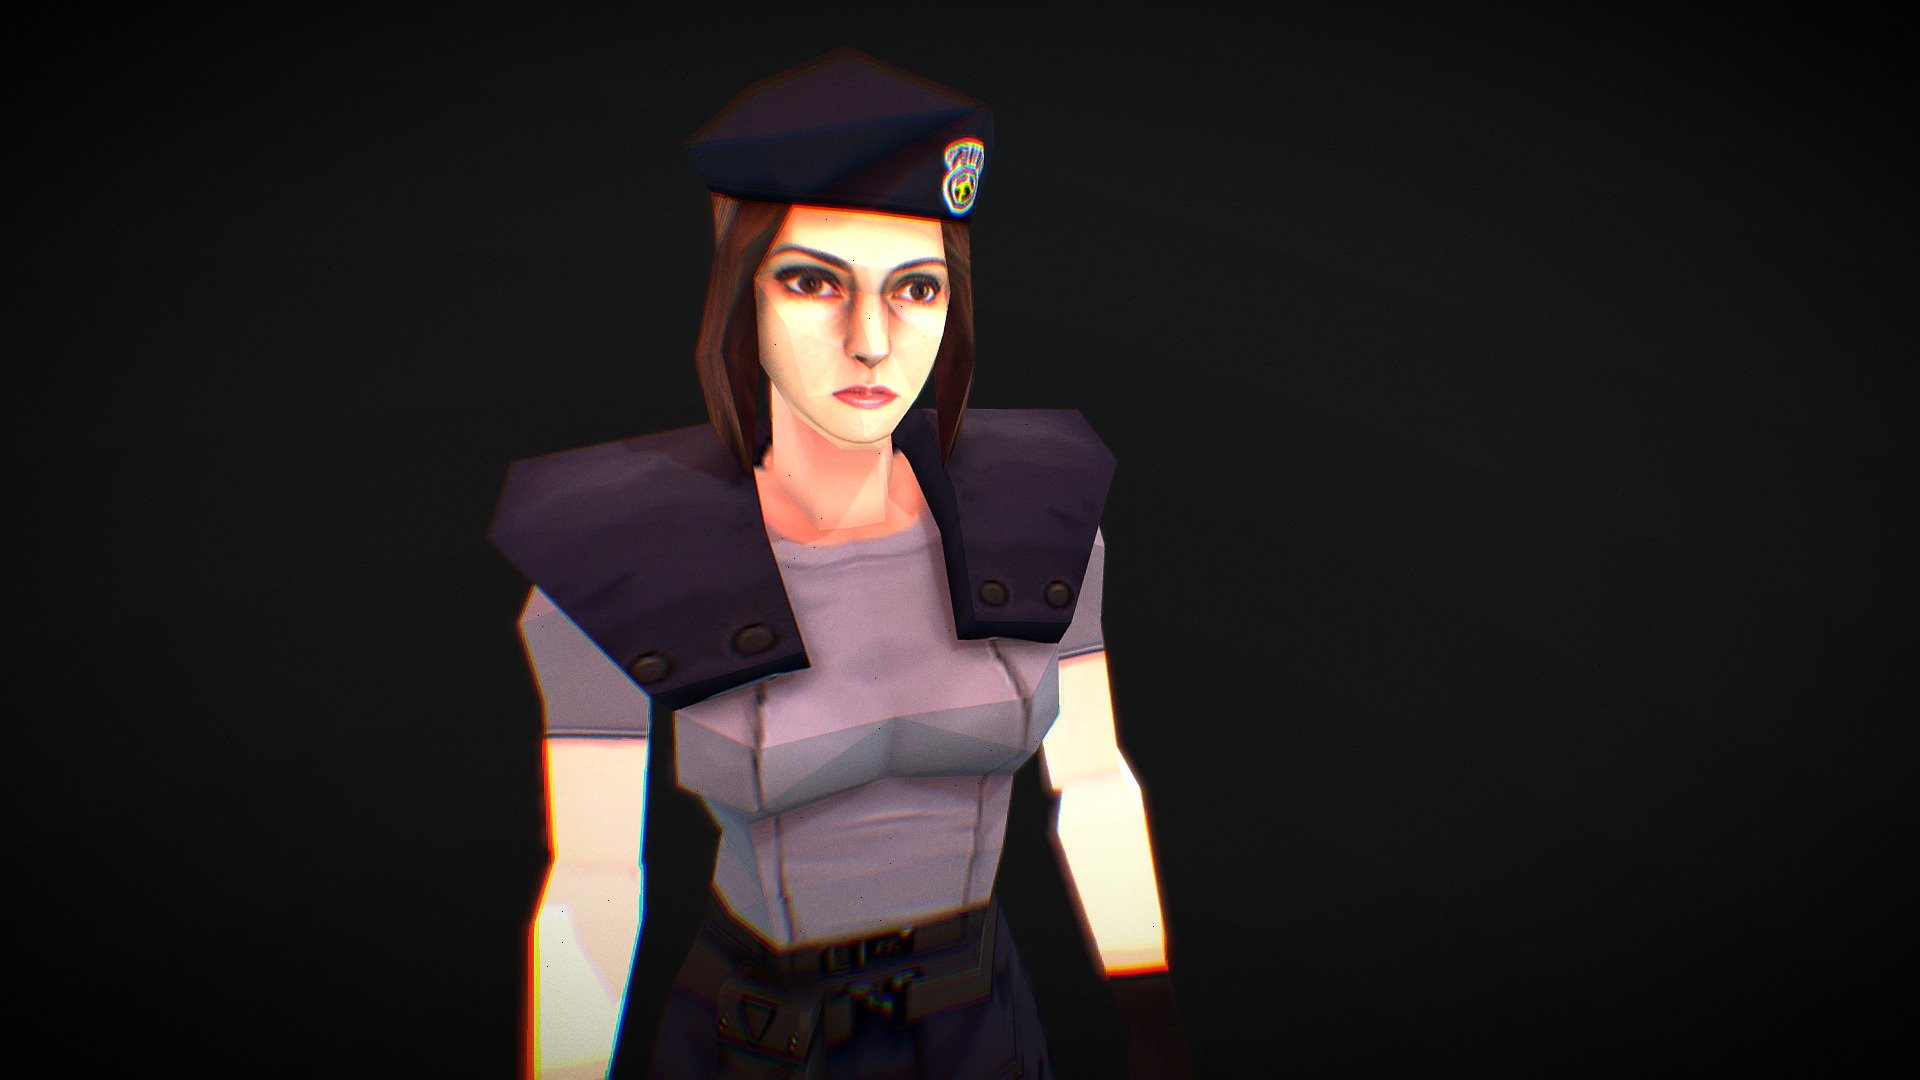 hey guys !!
sorry i wasn't upload anything for so long !
so here is the new model from resident evil 1 ps1
sorry but i decided to make this model non-downloadable just a visit only model 
.
because i don't own any rights to jill valentine and it's owned by capcom and charcter is copyrighted!
.
so i just upload the ps1 model here and i remastered her texture and i animate it!
please leave a like and comment if you enjoyed!
more models are coming soon!
bye :-) - Resident Evil 1 Jill S.T.A.R.S (Remastered) - 3D model by HimSelf (@aria-scorpion) 3d model